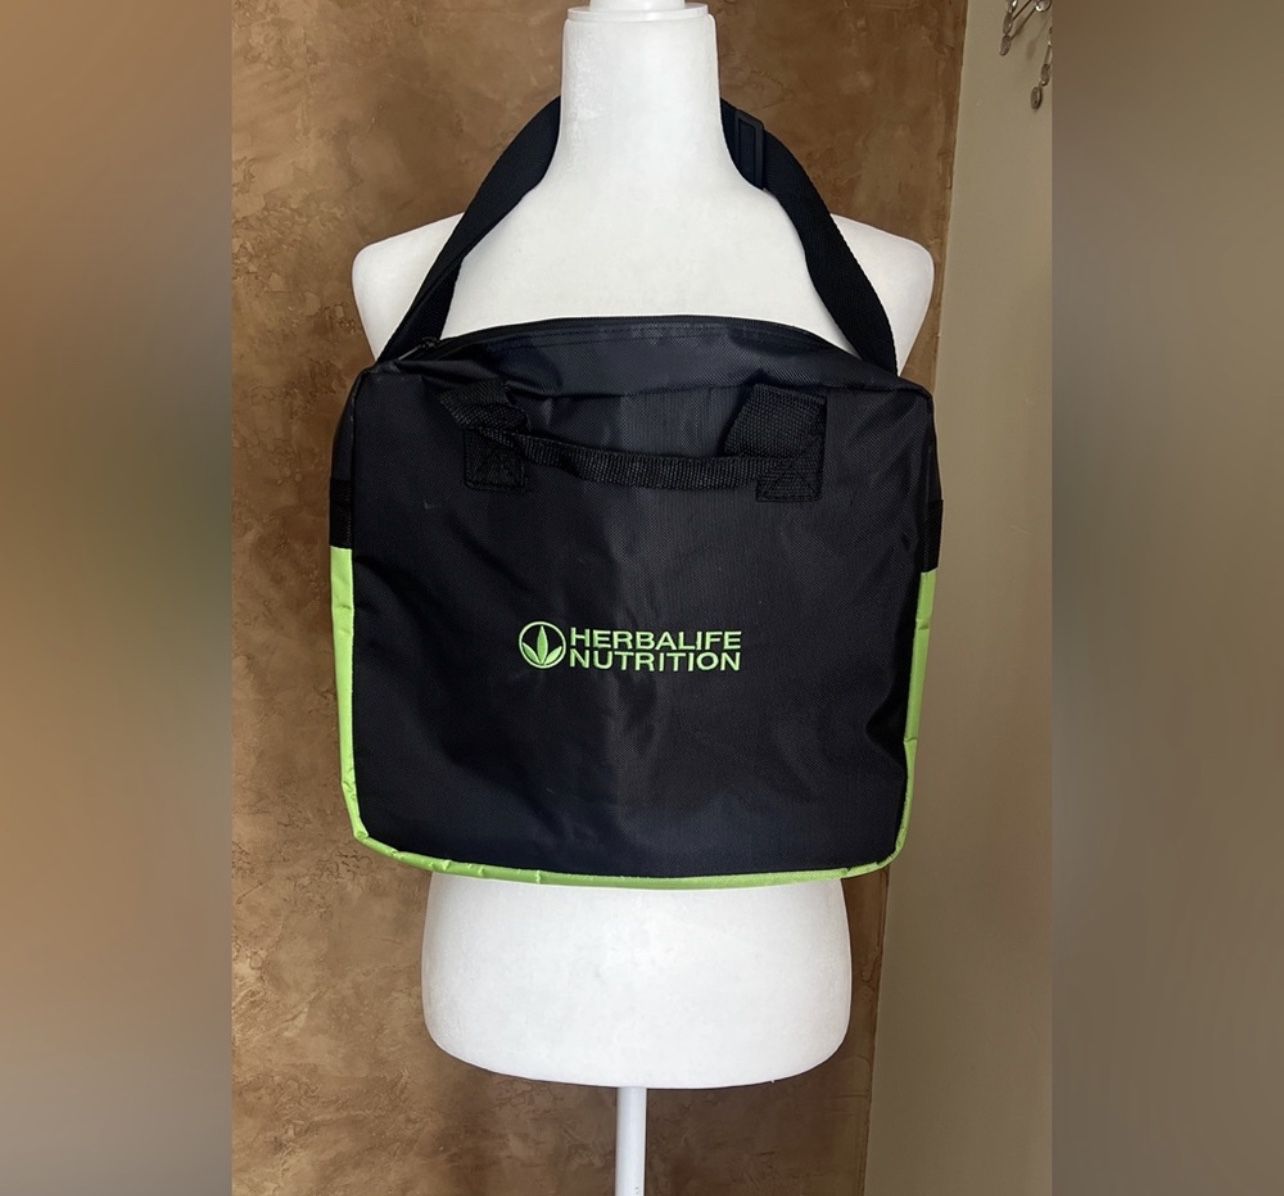 HERBALIFE NUTRITION BAG ZIP UP CARRY CASE TOTE BAG Lime Green and Black